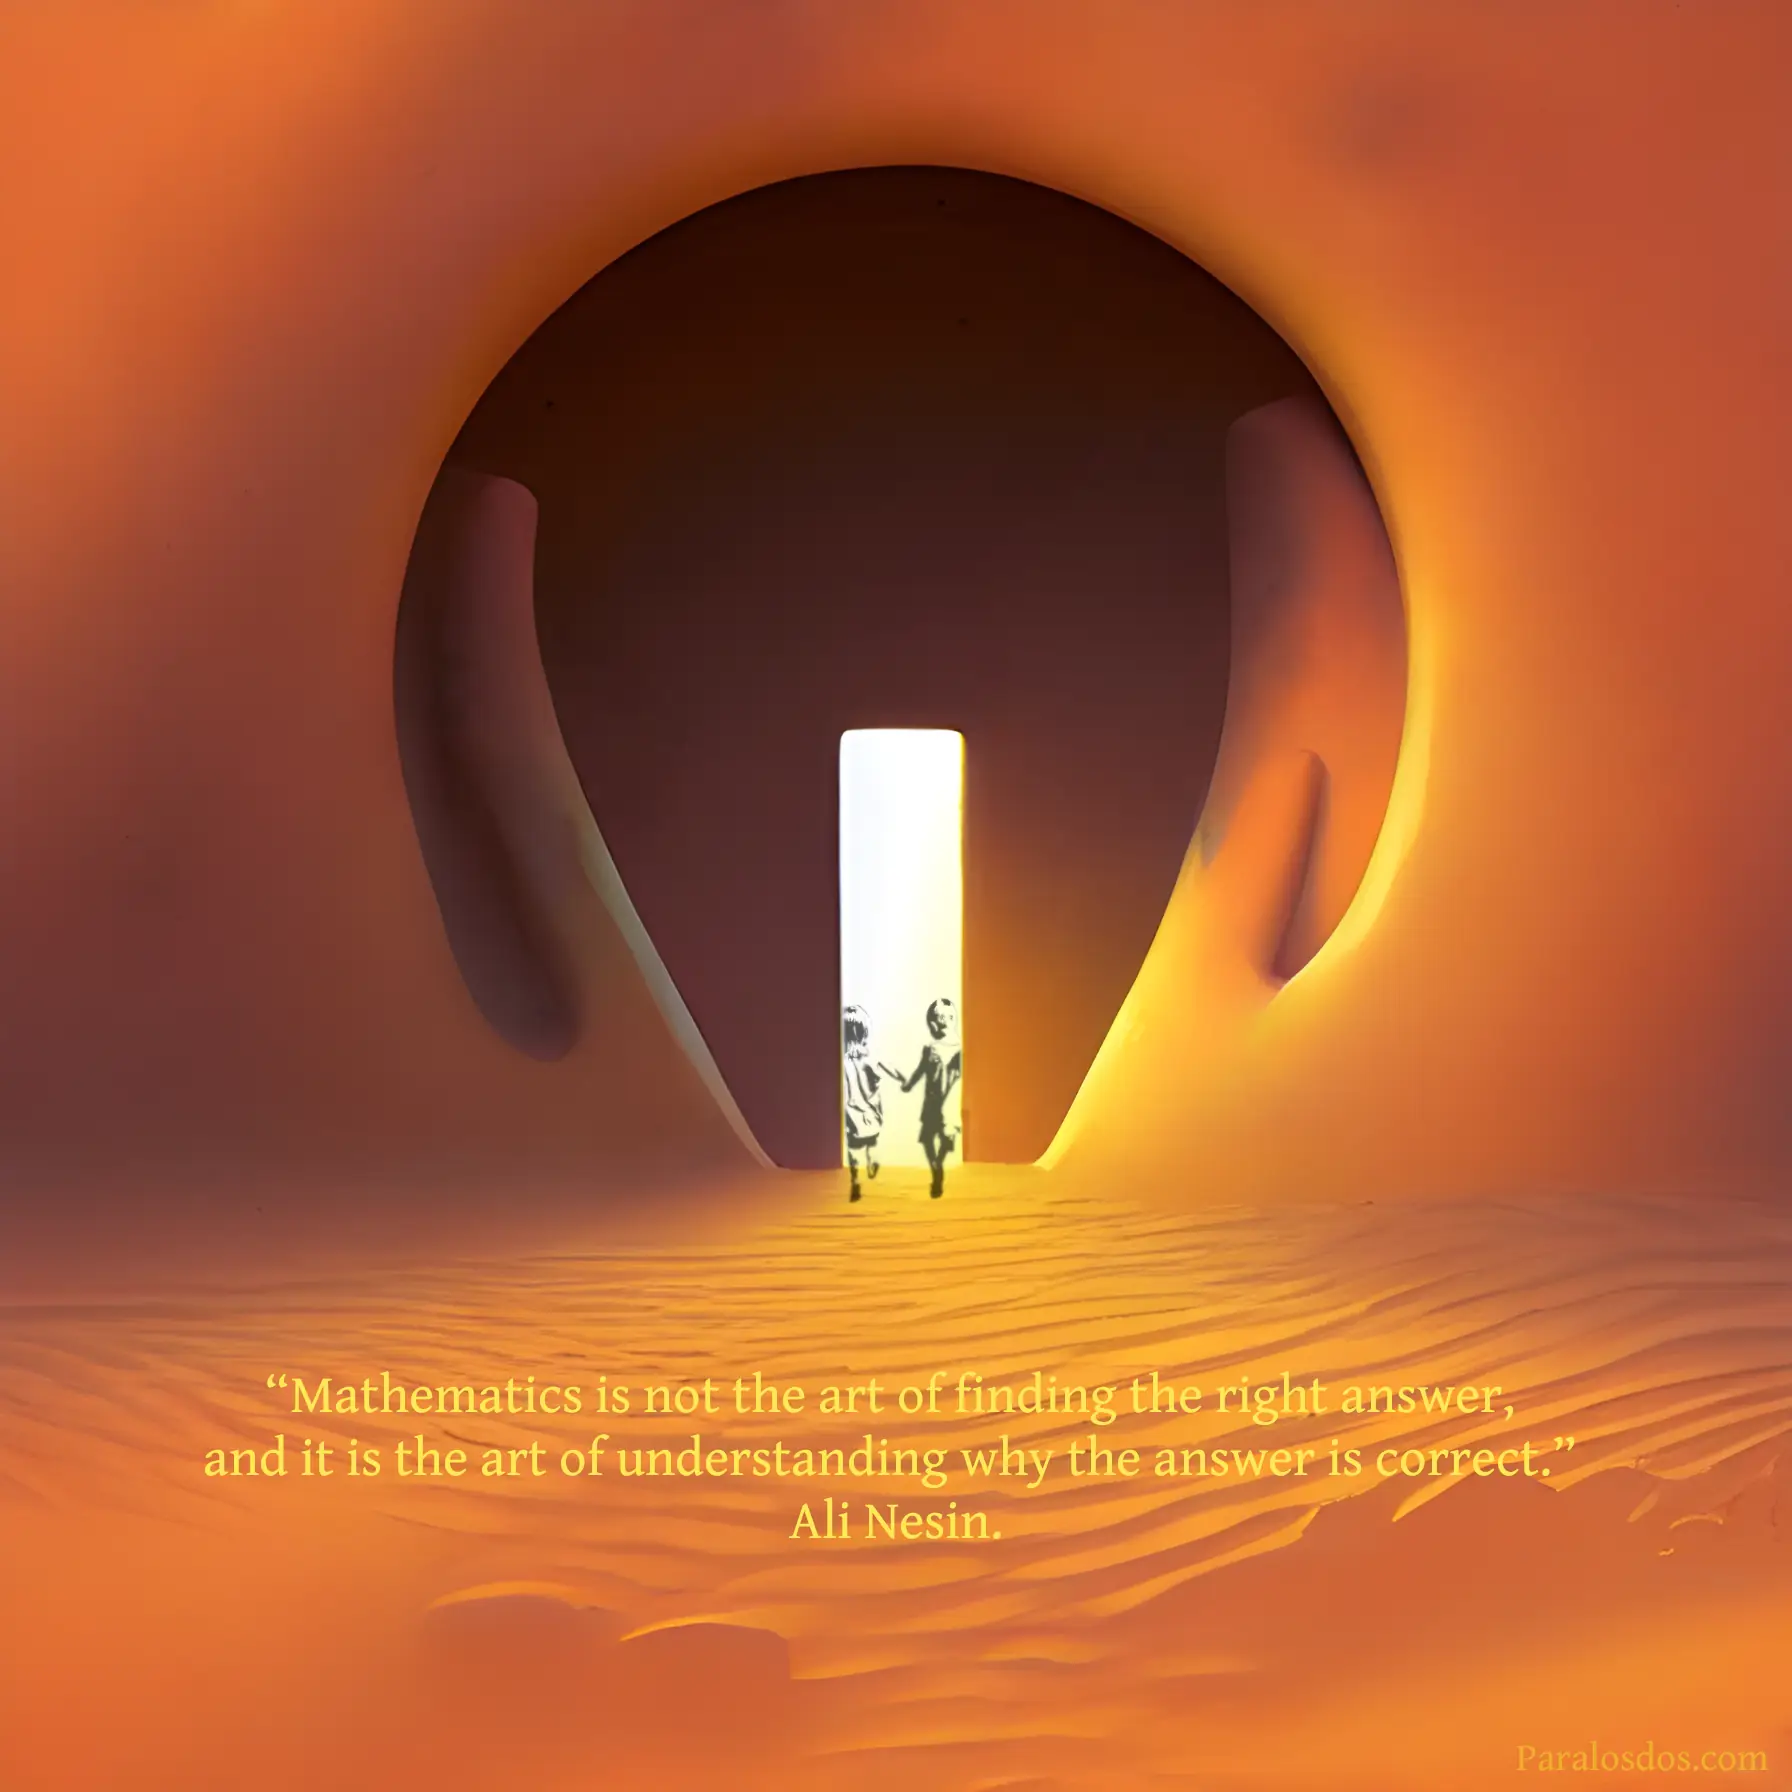 A fantastical artistic rendering of an upright rectangular portal in the desert. The quote reads: “Mathematics is not the art of finding the right answer, and it is the art of understanding why the answer is correct.” — Ali Nesin.